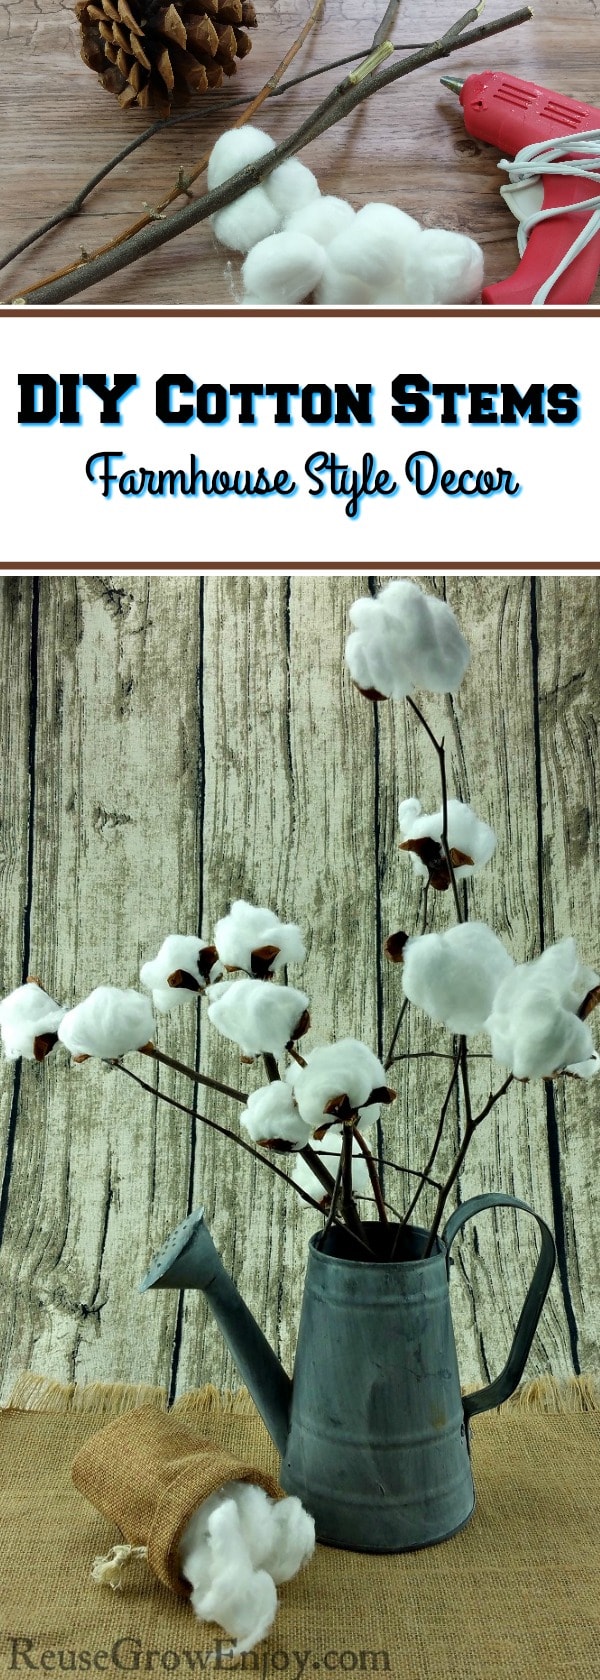 Did you know that making your own farmhouse style cotton stem is super easy and cheap? Click over and I will show you how to make this DIY cotton stem!